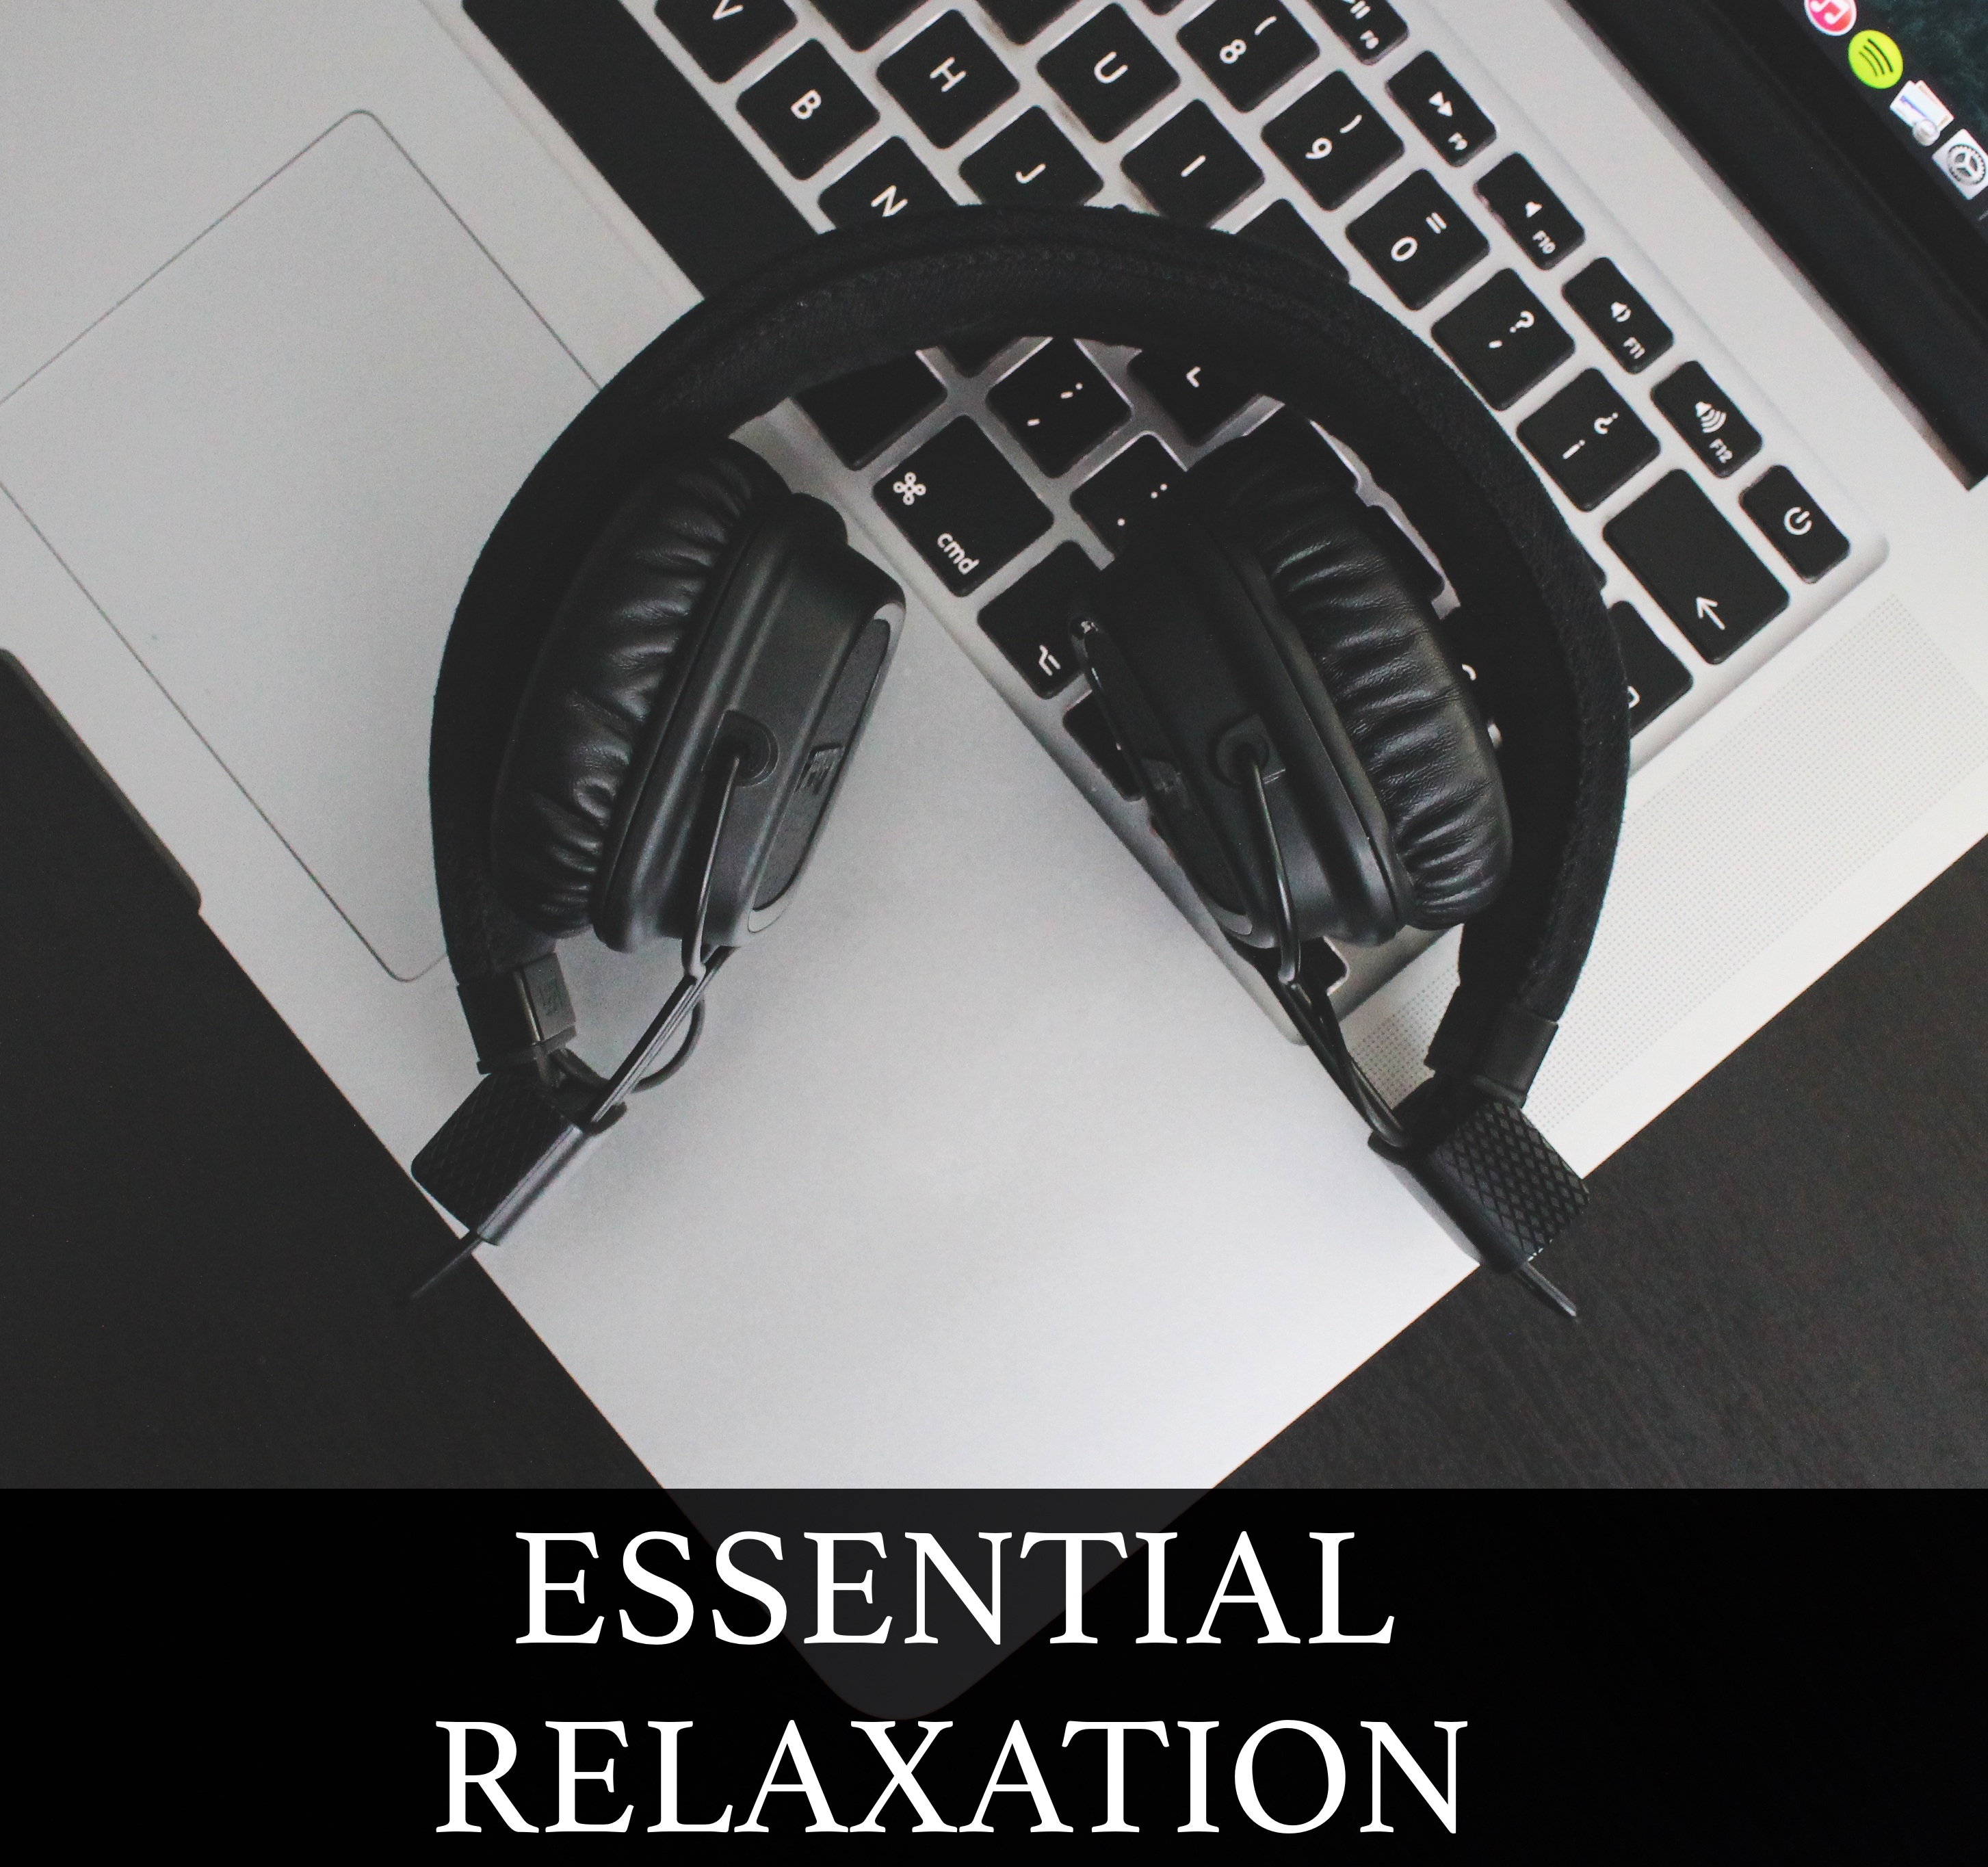 Essential Relaxation Mix - Chillout Jazz & Downtempo Tunes for Stress Relief, Study Help, Mindfulness, Creativity and Inspiration